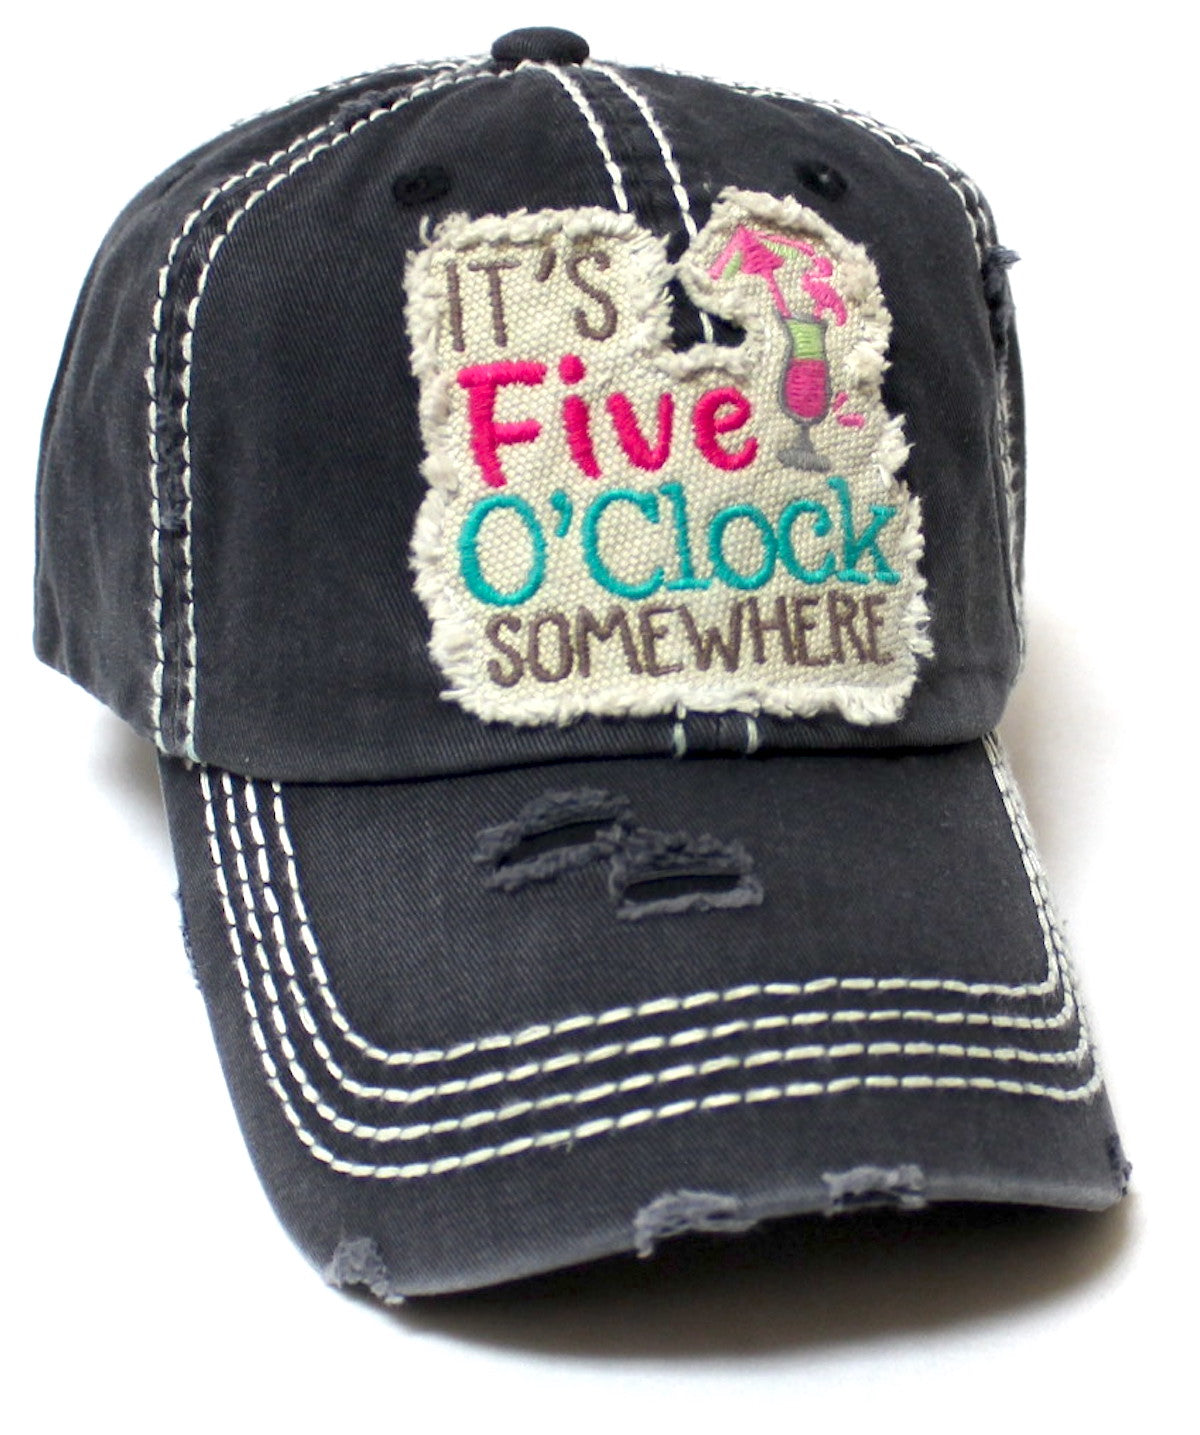 CAPS 'N VINTAGE Women's It's Five O'Clock Somewhere Patch Embroidery Monogram Hat